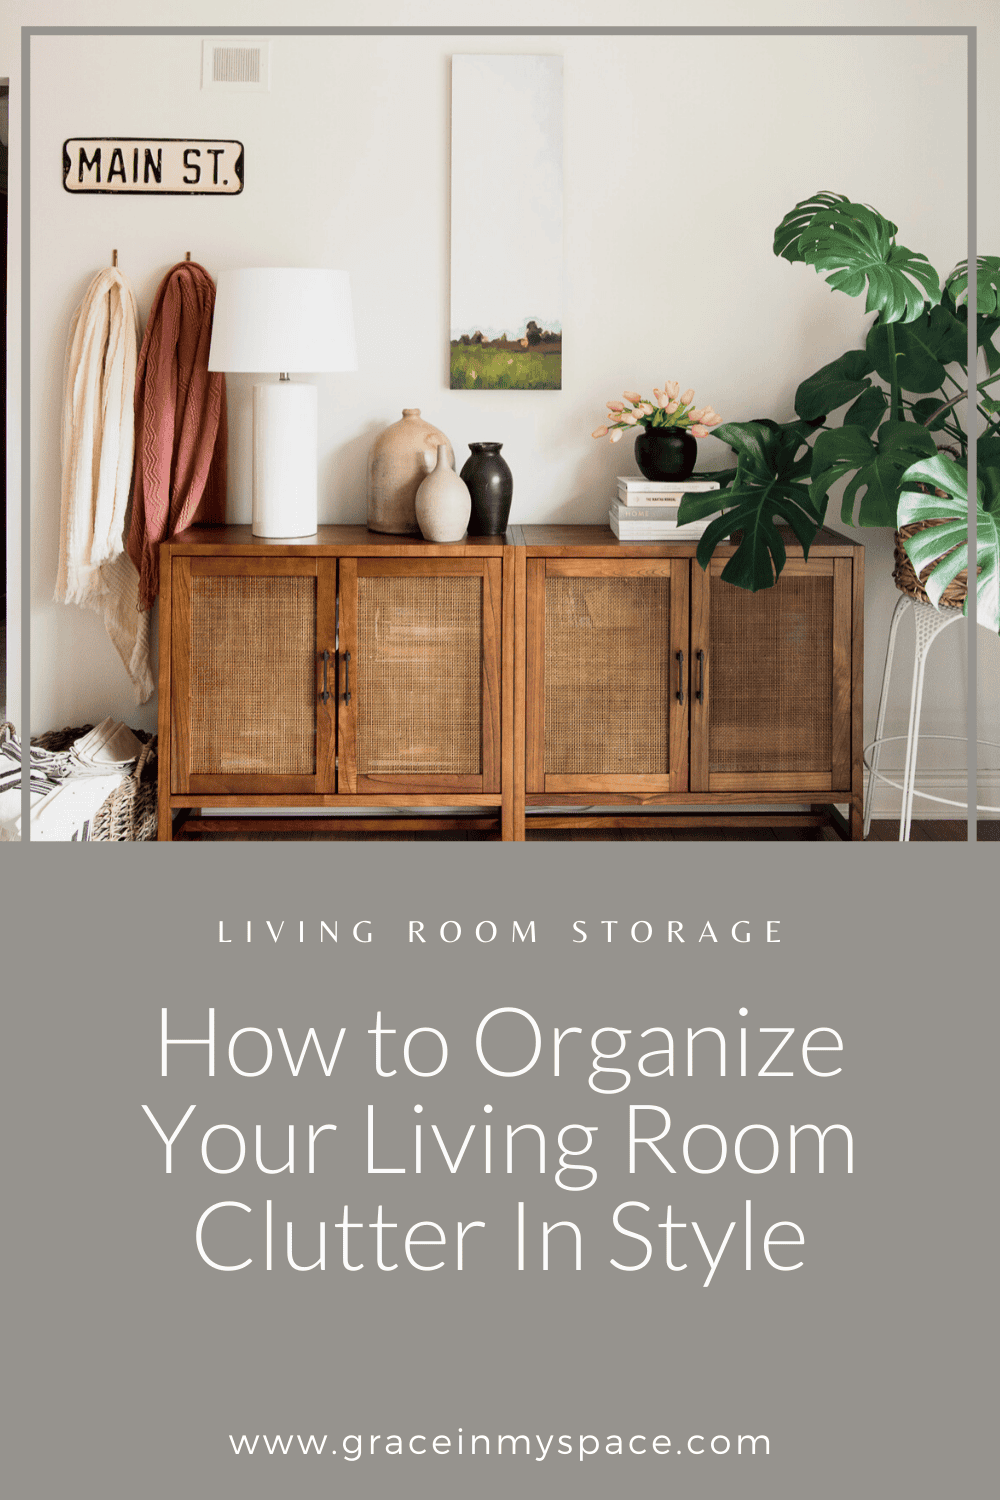 Living Room Storage Cabinet Get The, How To Build Storage Cabinets For Living Room